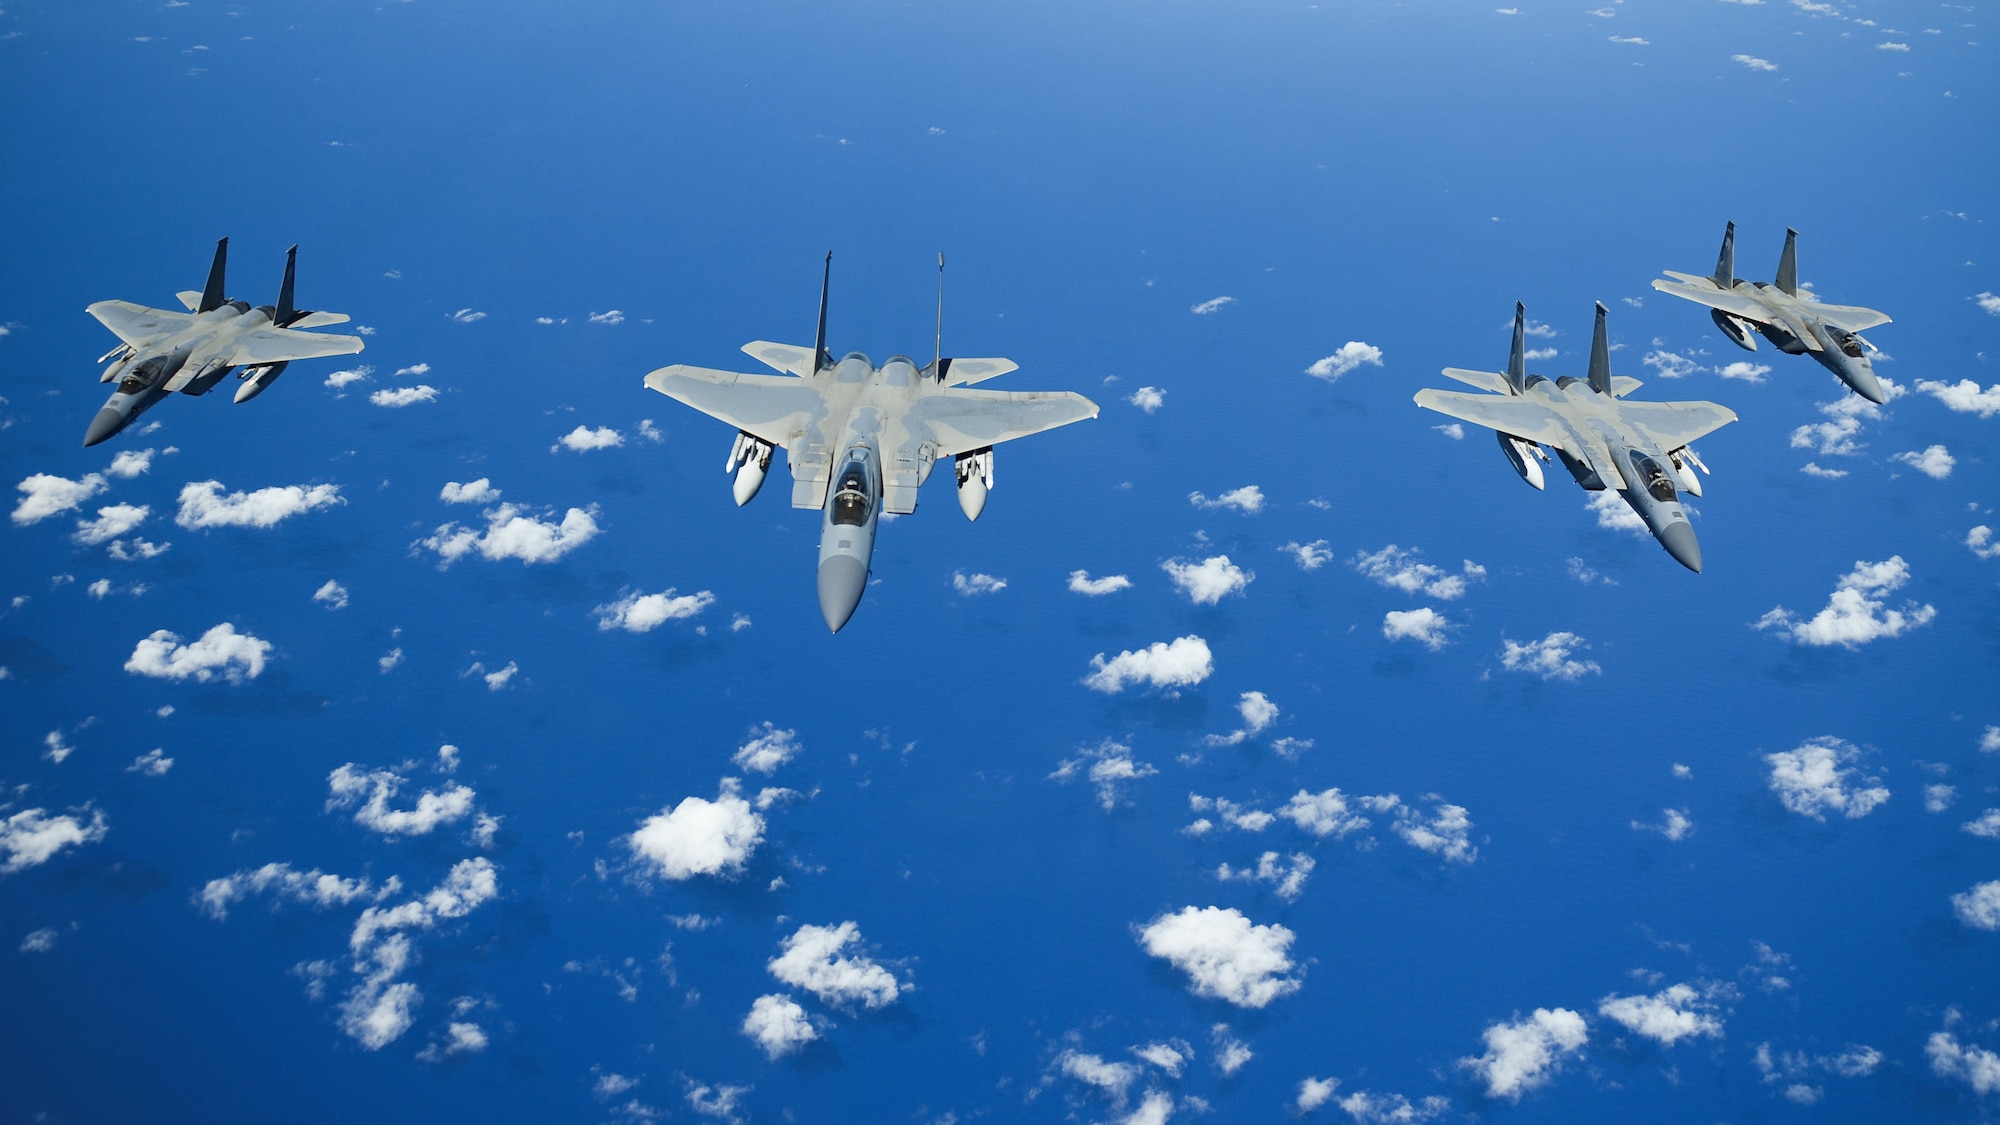 United States Air Force F-15 Eagles from the 173rd Fighter Wing out of Kingsley Field in Klamath Falls, Oregon, fly in formation over the Pacific Ocean during the Sentry Aloha exercise at Joint Base Pearl Harbor-Hickam, August 27, 2019.